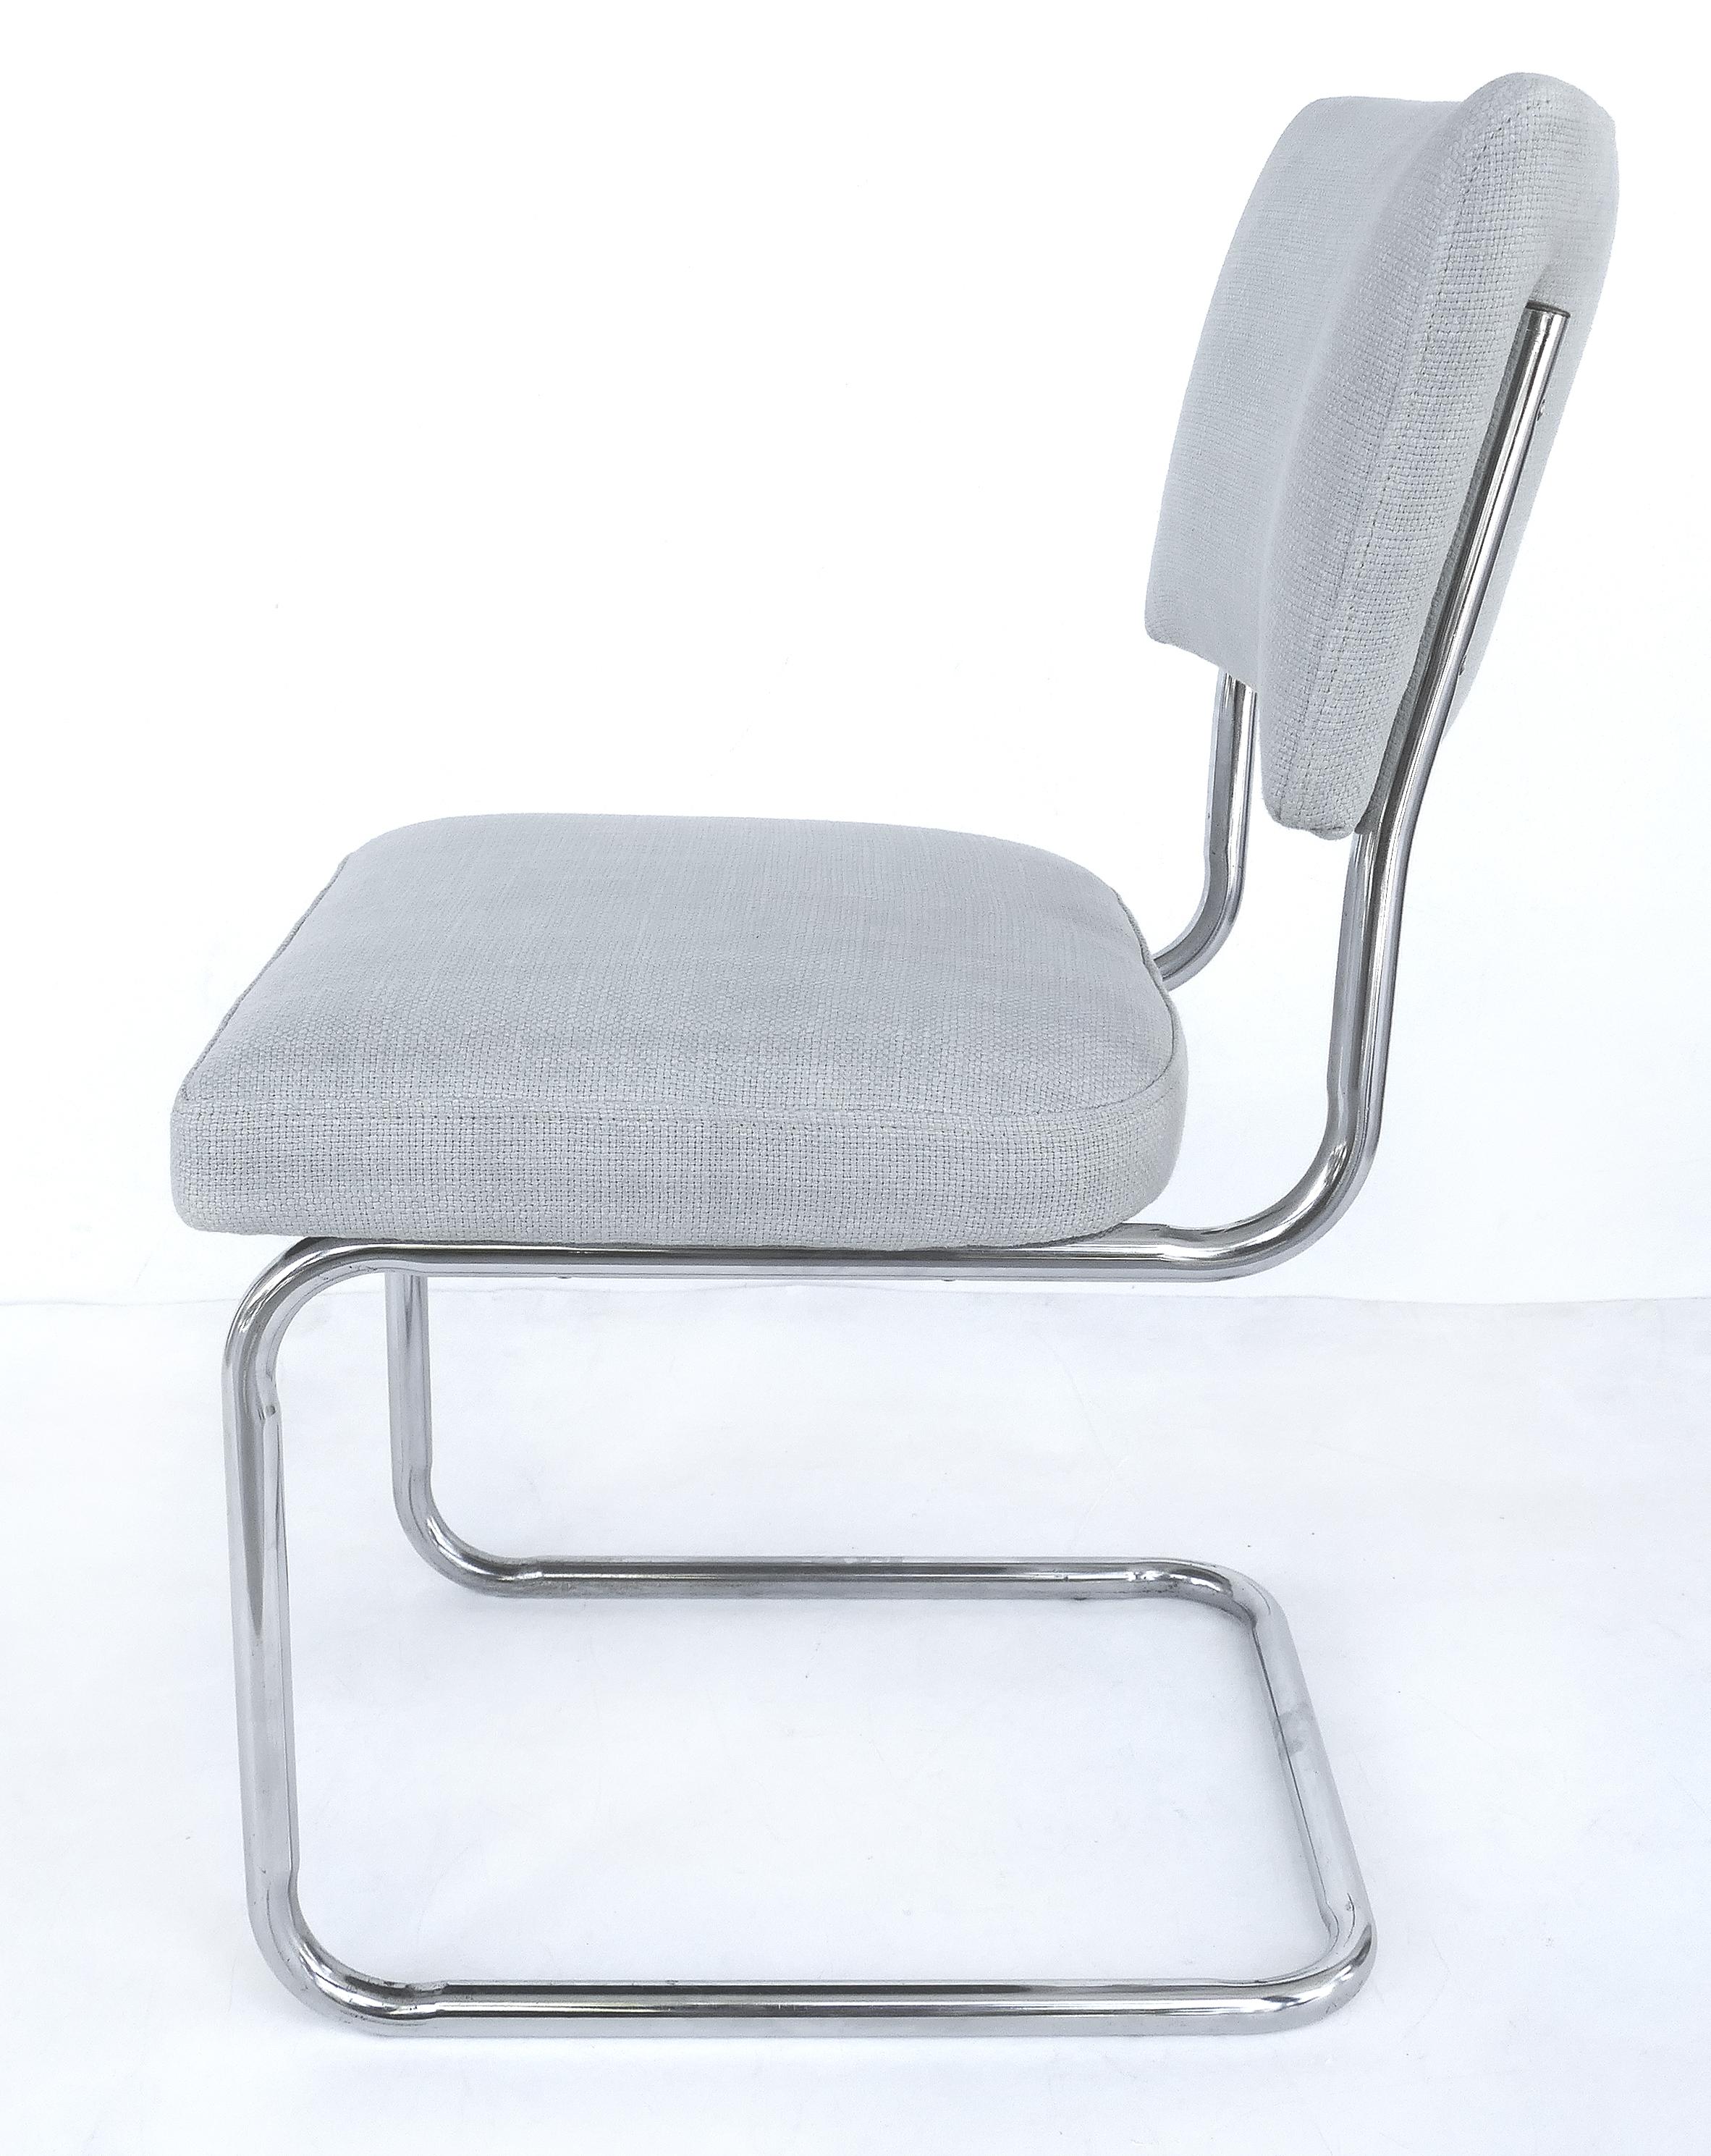 Set of 8 Italian tubular chrome dining chairs, new upholstery and cantilevered

Offered for sale is a set of eight Italian tubular chrome cantilevered dining chairs which have been newly upholstered in a light grey linen blend fabric.